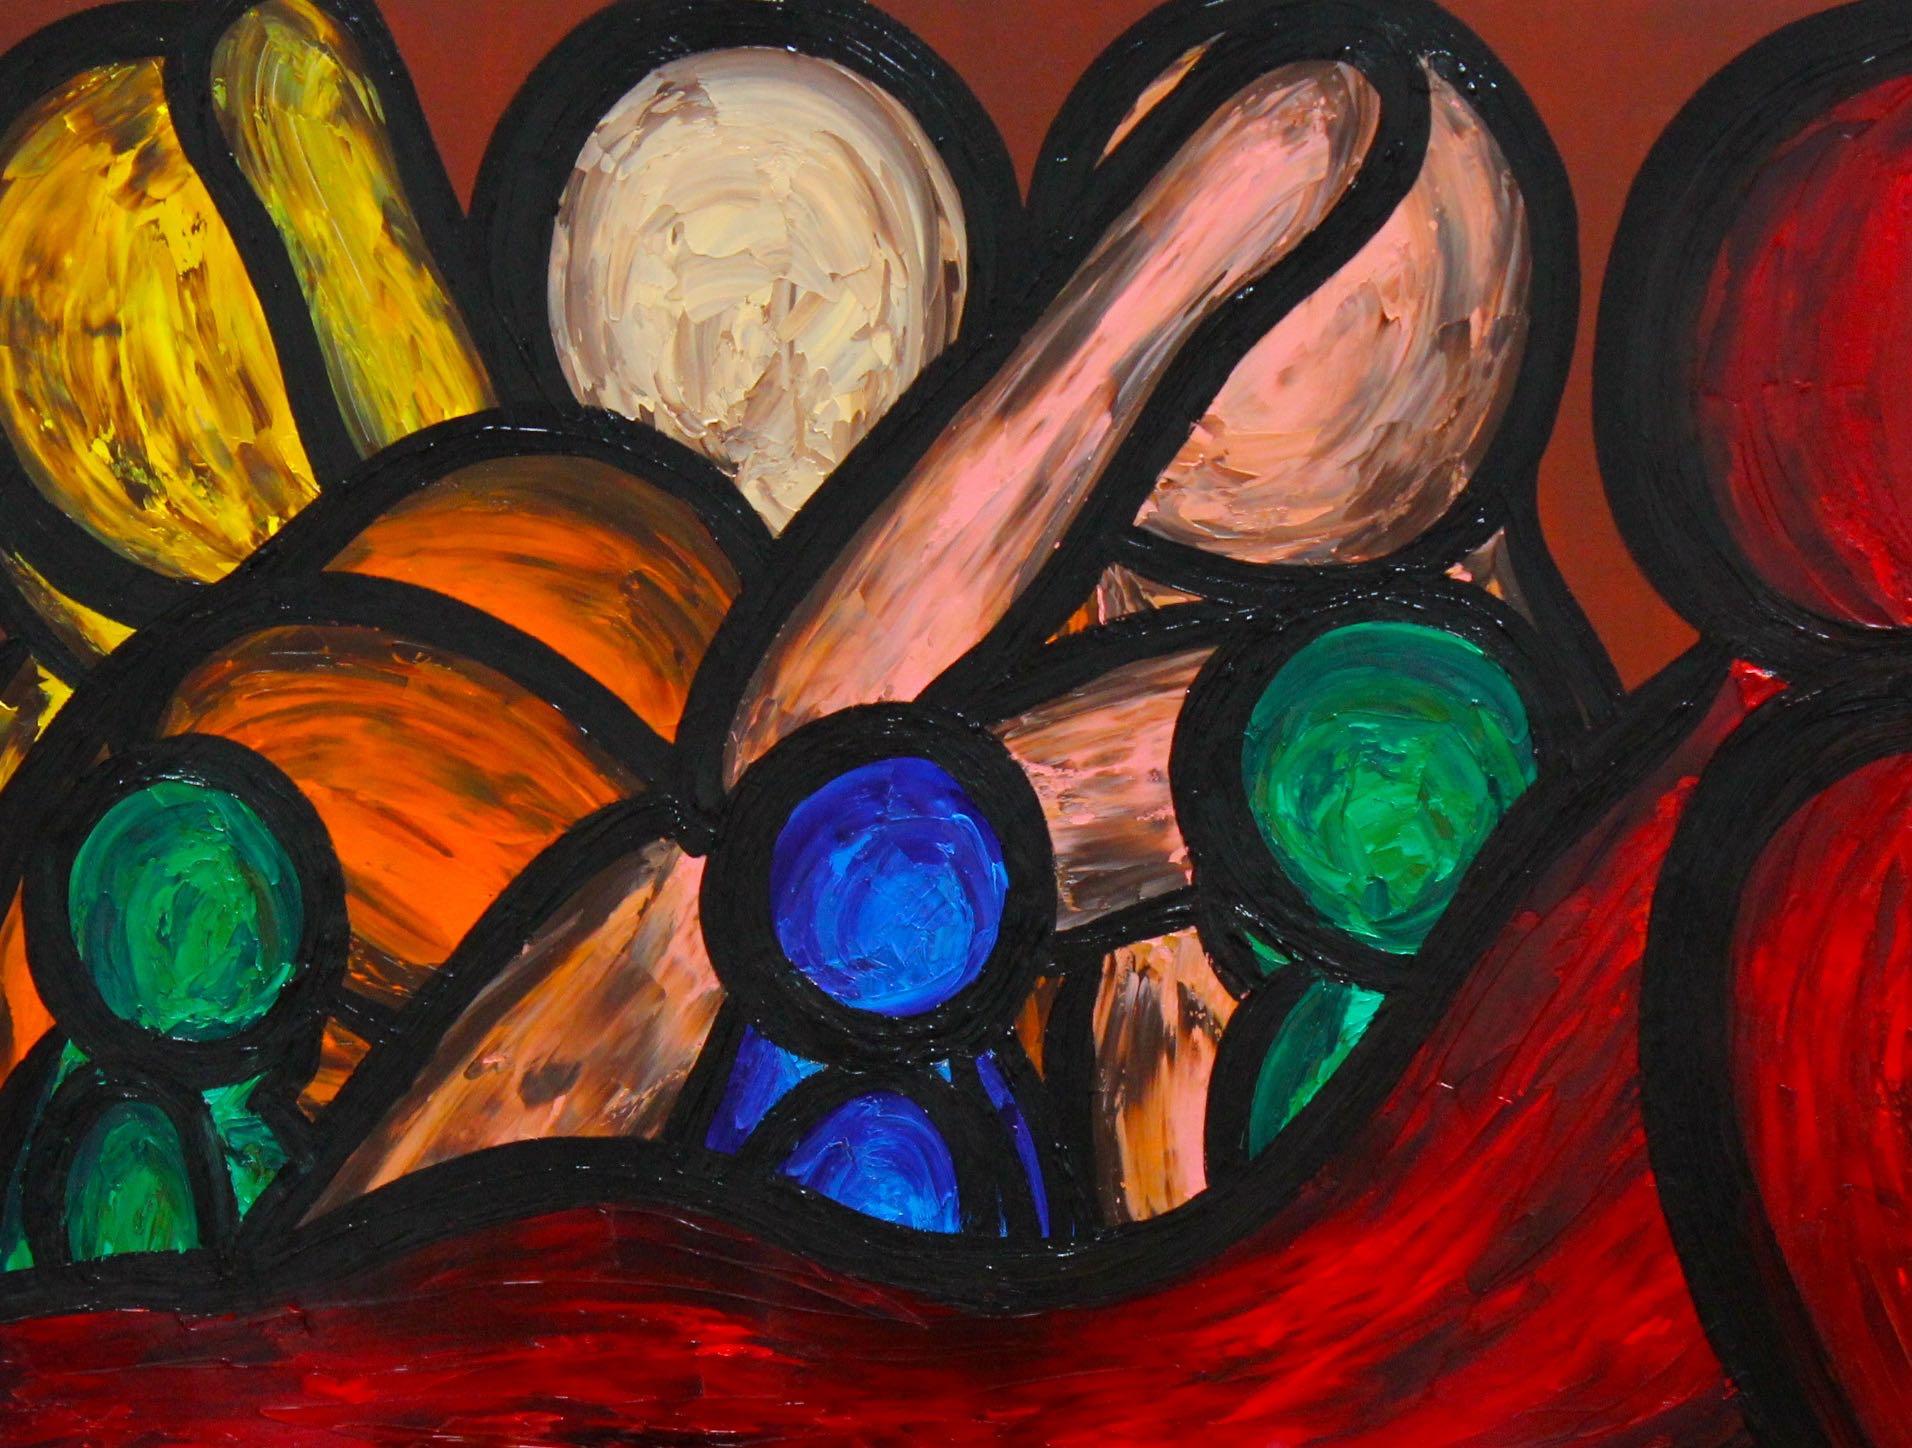 Francesco Ruspoli describes himself as an Expressionist painter. Through his employment of vibrant color and modern abstraction of the human form, Ruspoli seeks to express feelings, moods — the fundamental aspect of what it means to be human. “It is